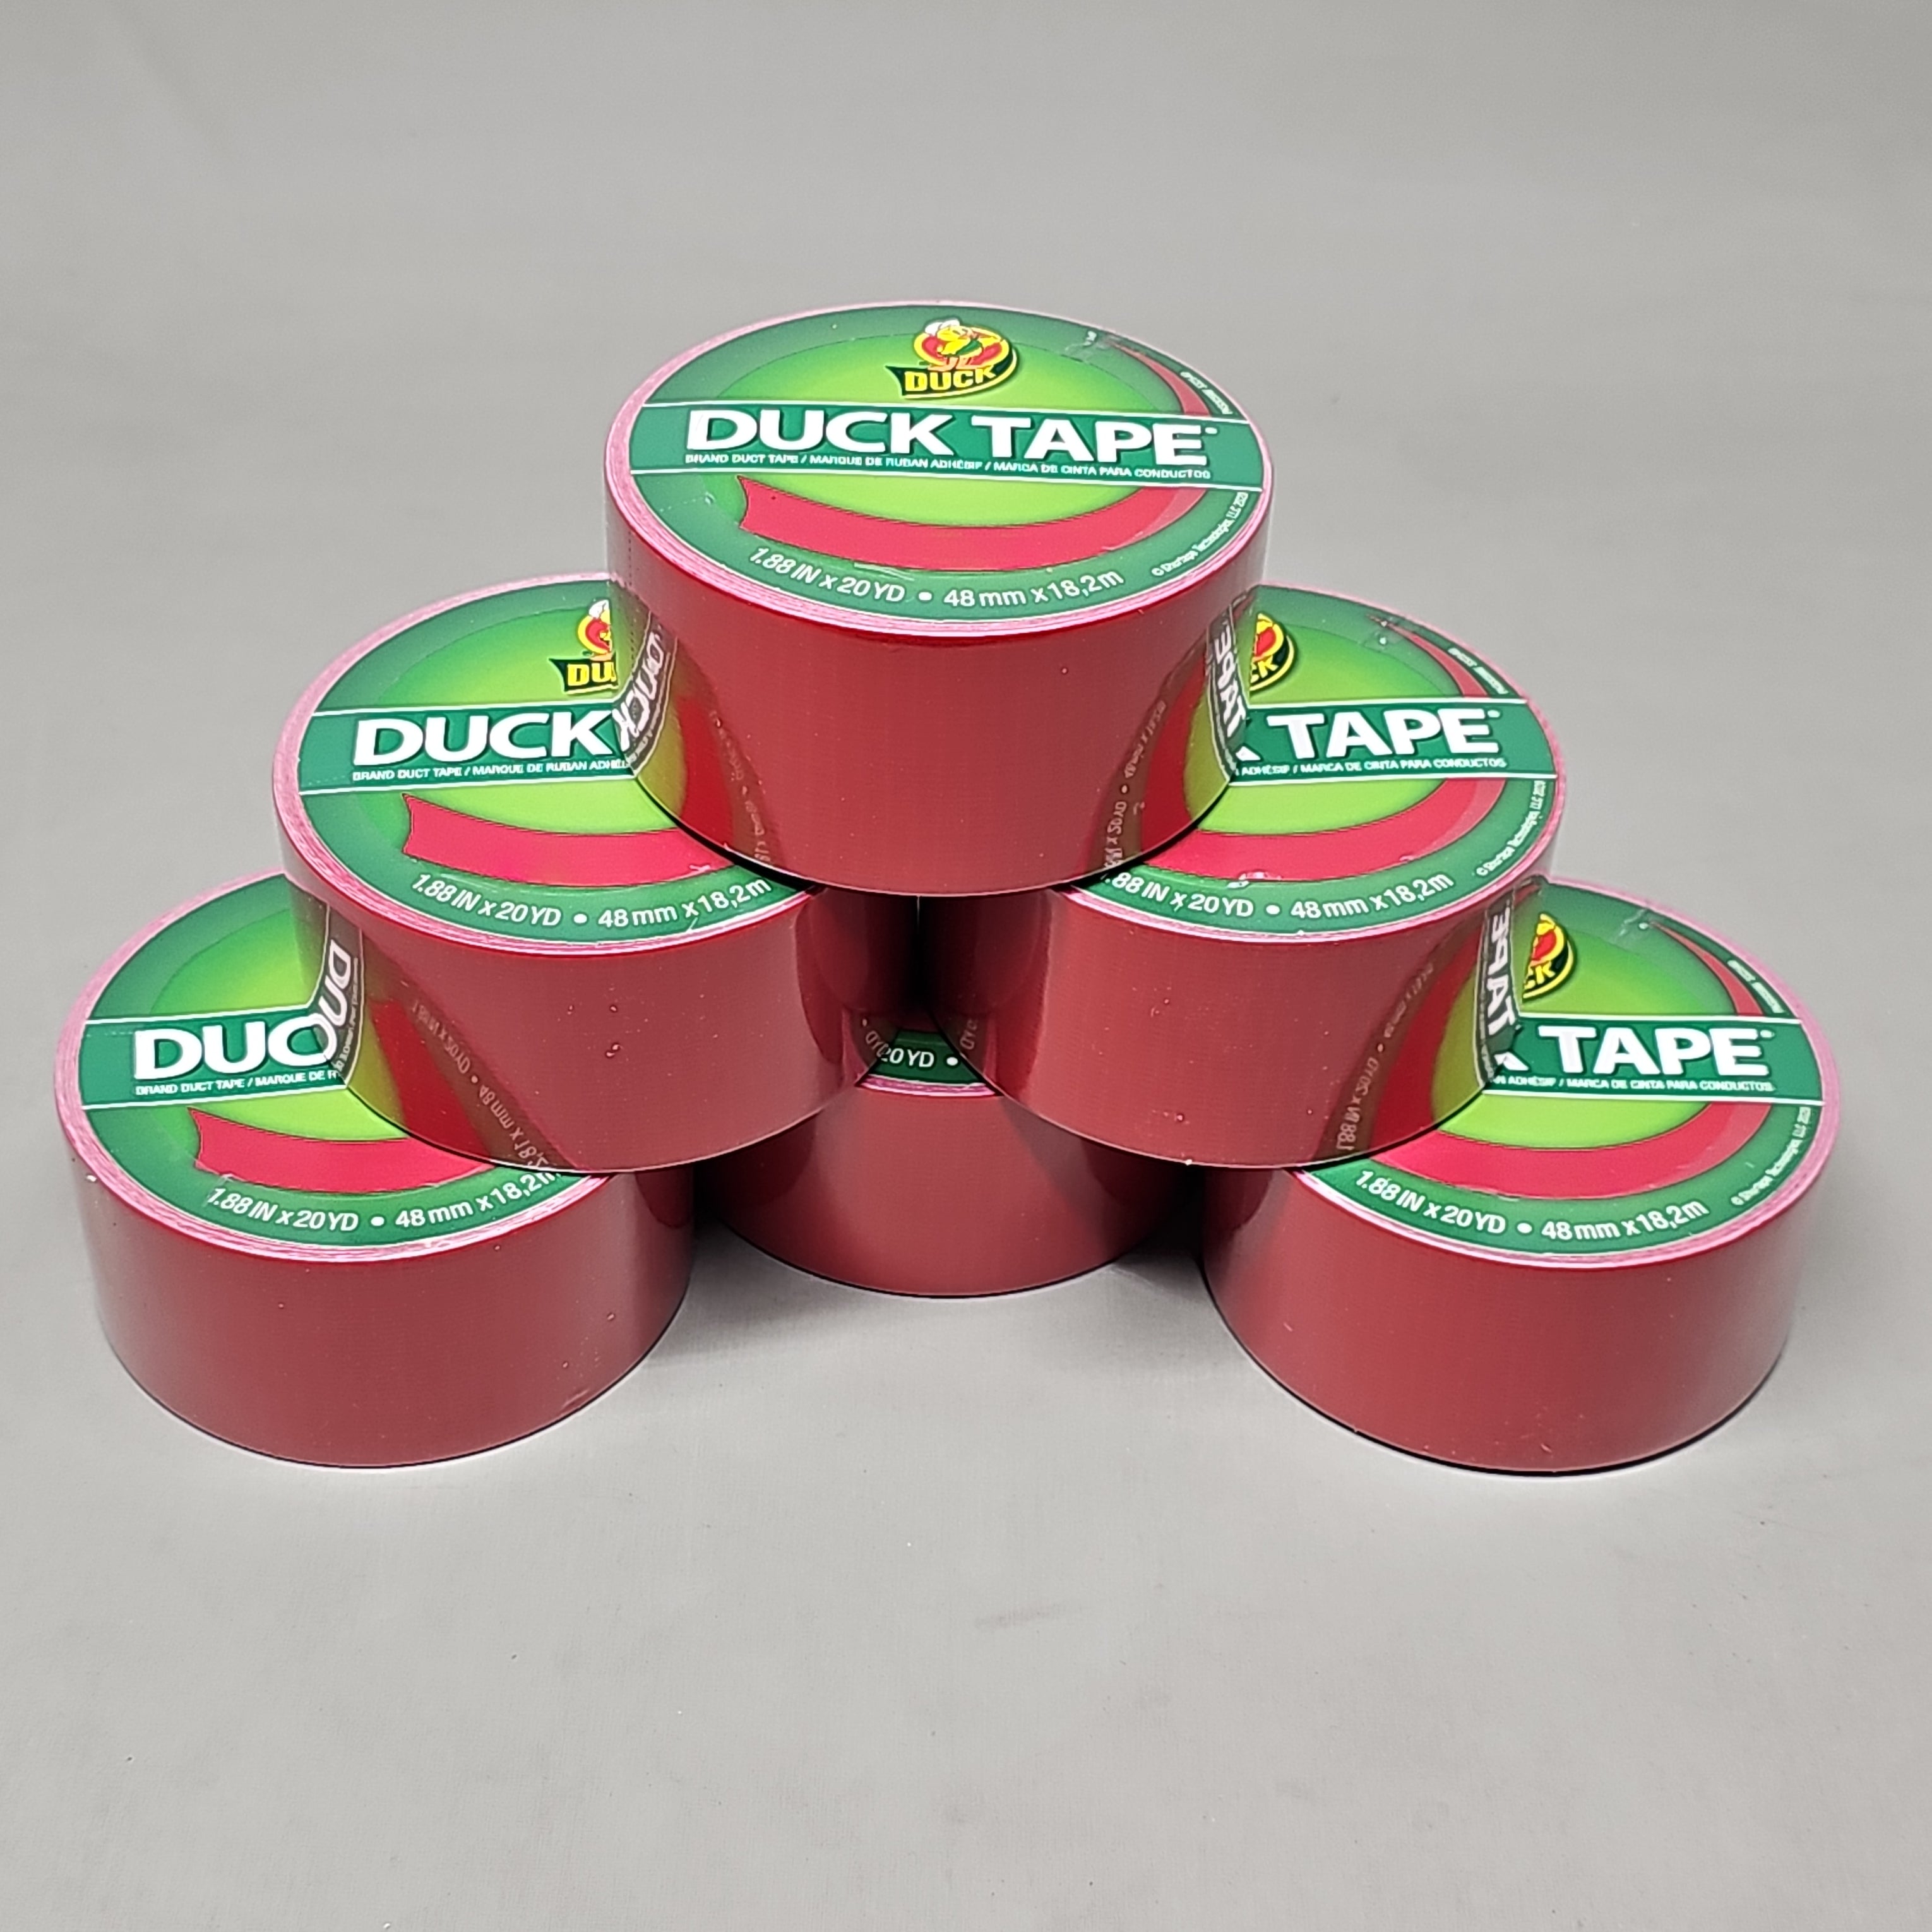 Duck Tape Brand Red Duct Tape, 1.88 in. x 20 yd.